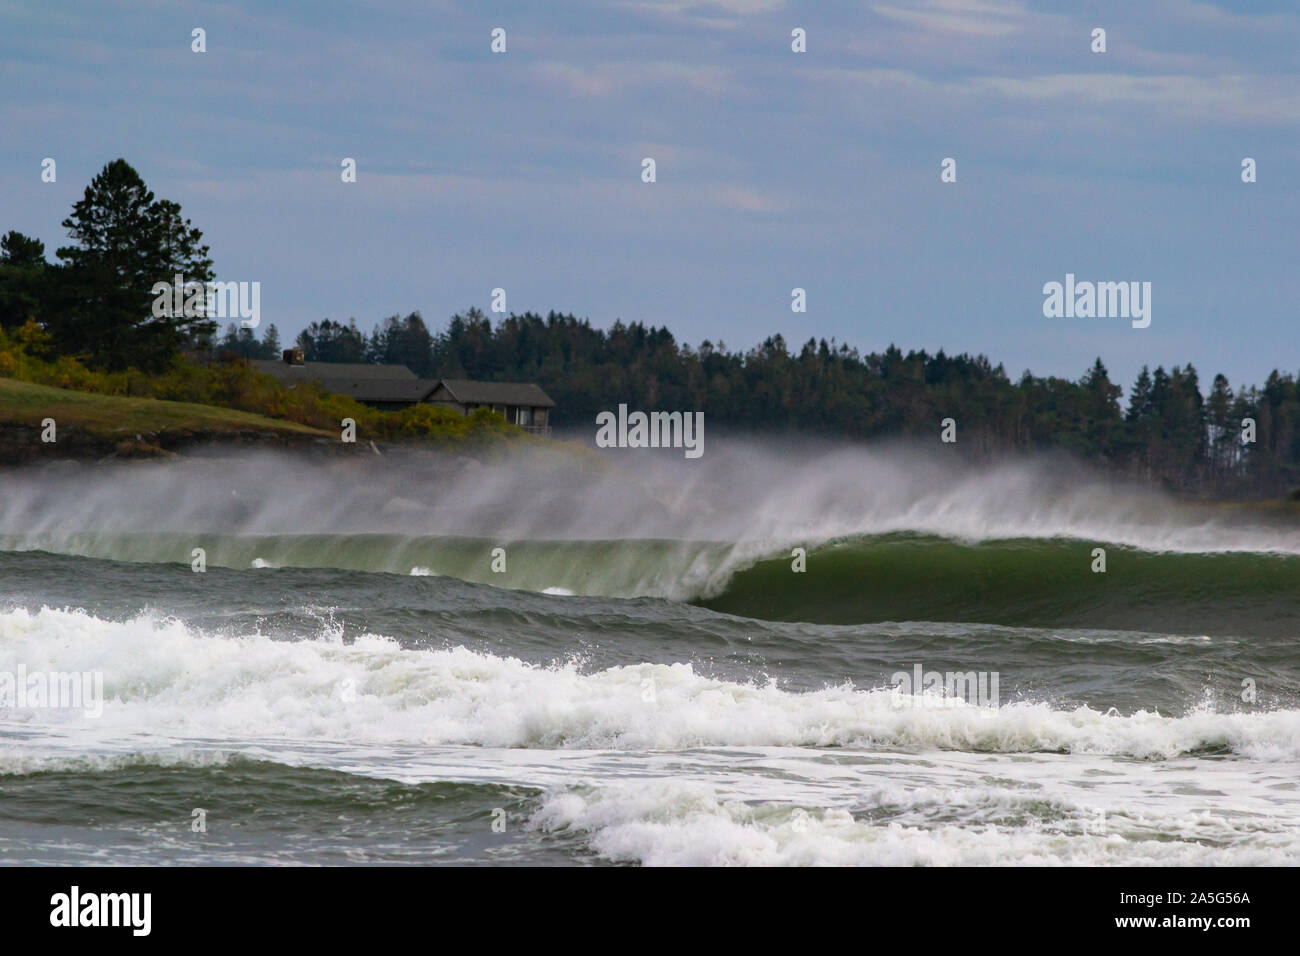 Scarborough, ME, October 10, 2019: heavy swell generated by a noreaster along maine coast creates a plunging barrel Stock Photo